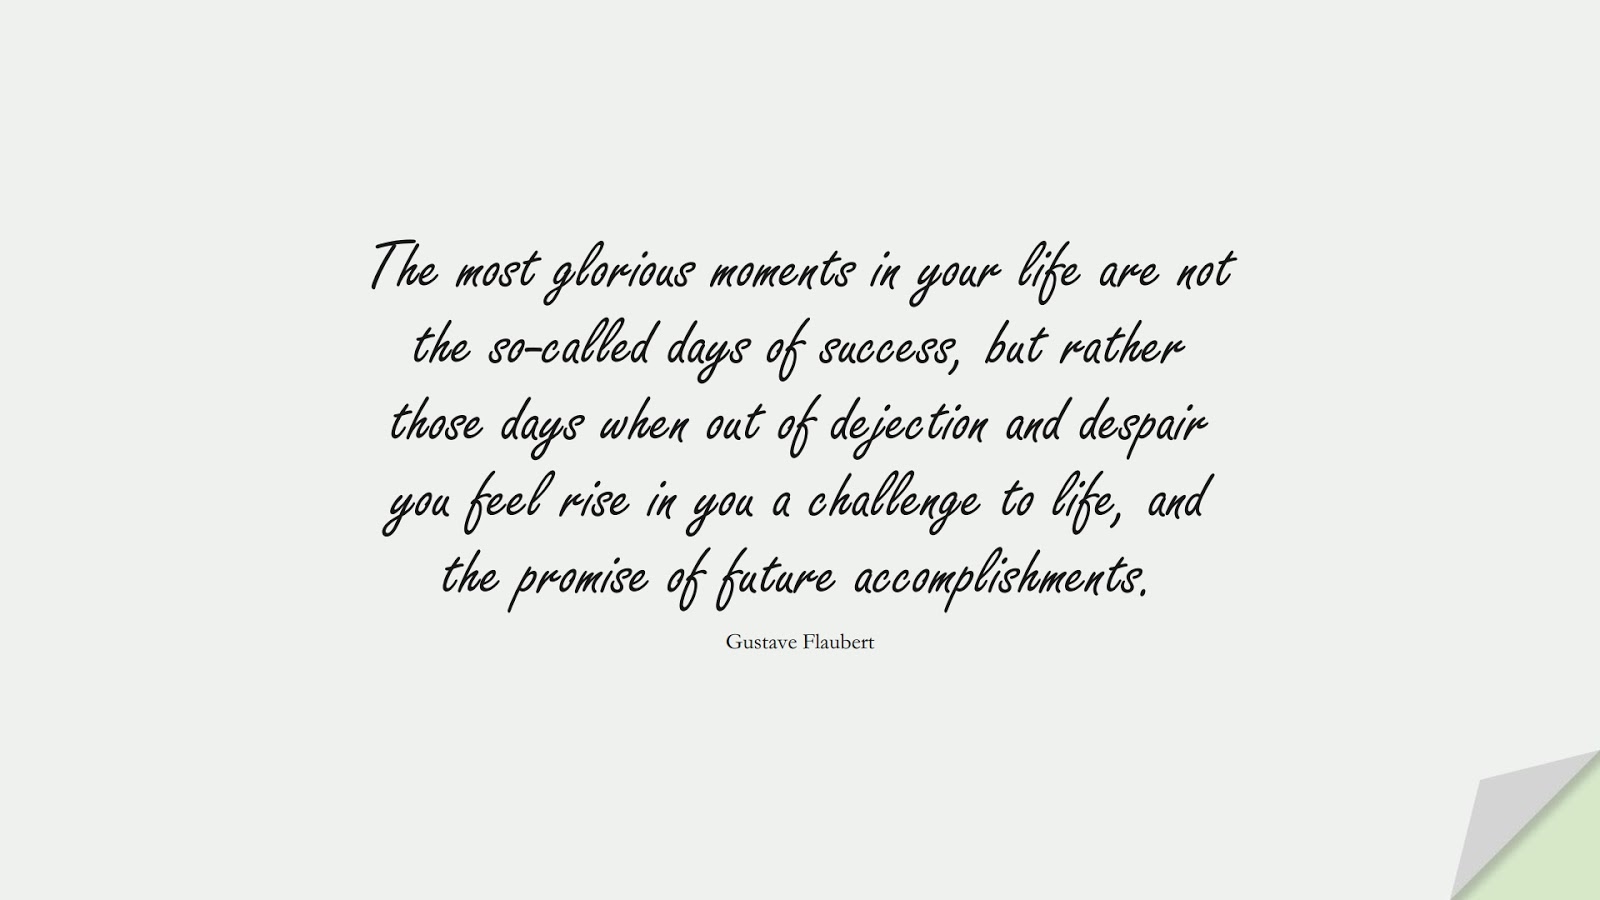 The most glorious moments in your life are not the so-called days of success, but rather those days when out of dejection and despair you feel rise in you a challenge to life, and the promise of future accomplishments. (Gustave Flaubert);  #SuccessQuotes